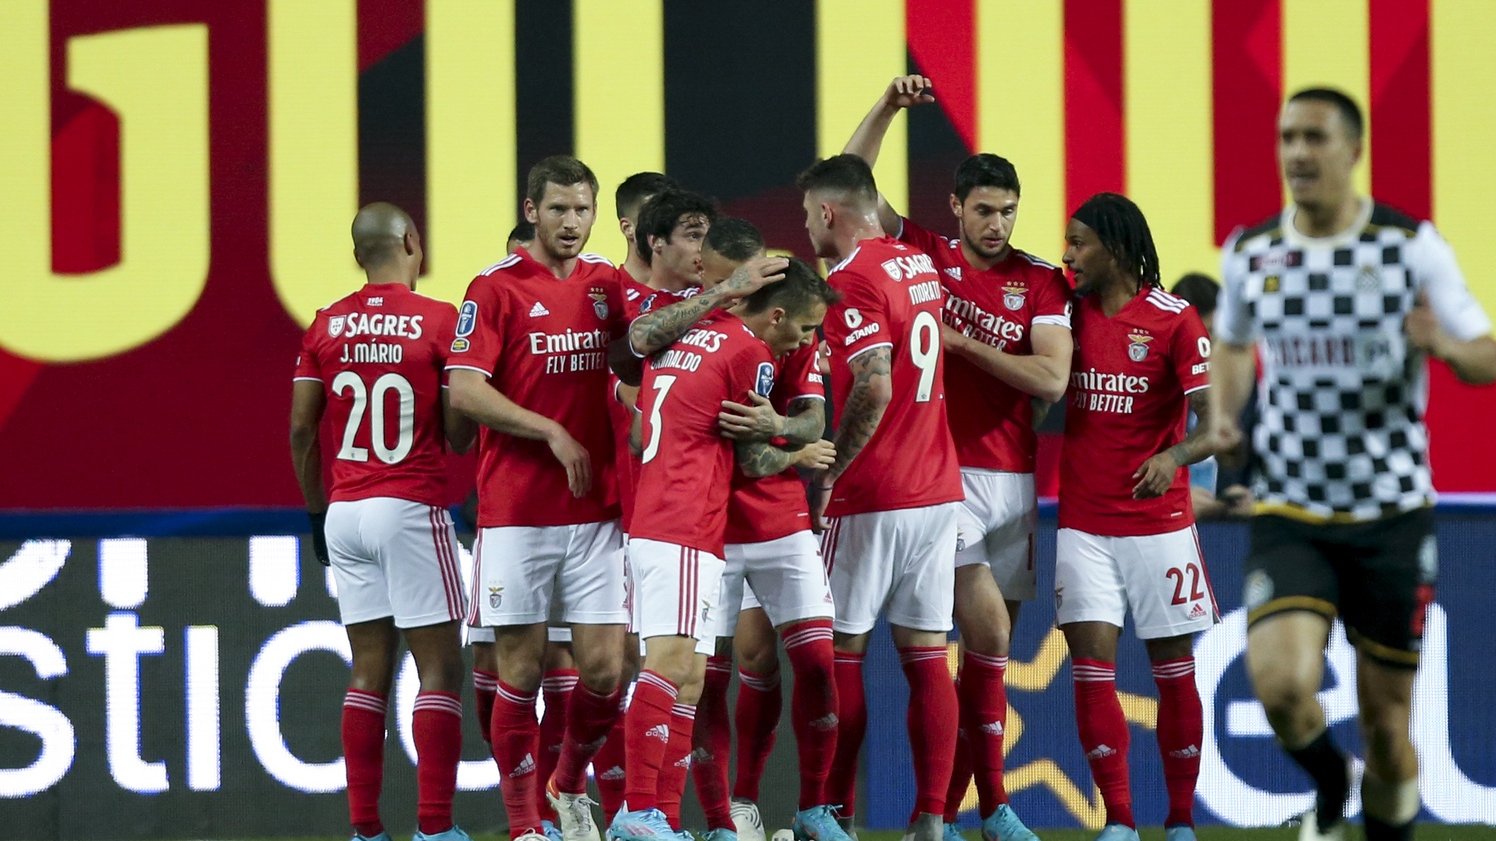 Benfica players celebrate after scoring a goal against Boavista during their Portuguese League Cup semi final soccer match held at Magalhaes Pessoa stadium, in Leiria, Portugal, 25 January 2022. PAULO CUNHA/LUSA